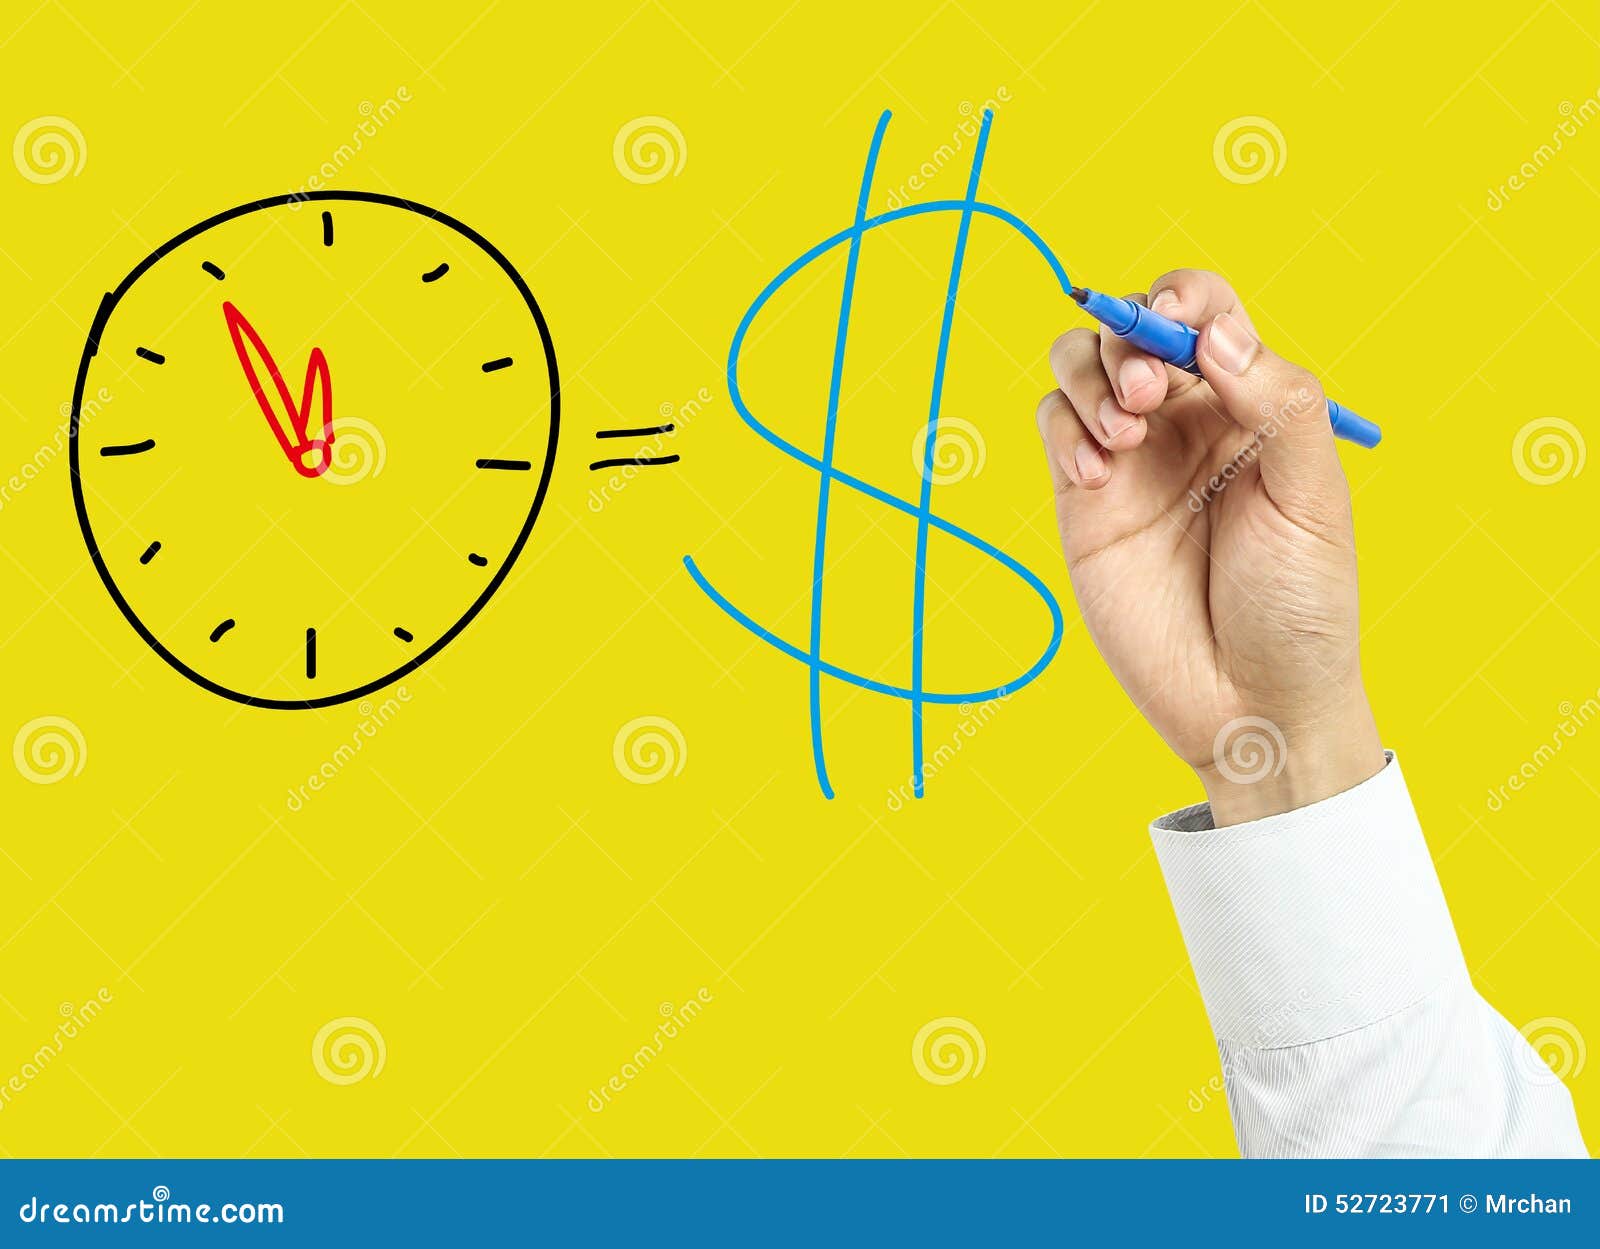 Businessman Hand Drawing Time is Money Concept Stock Image - Image of ...